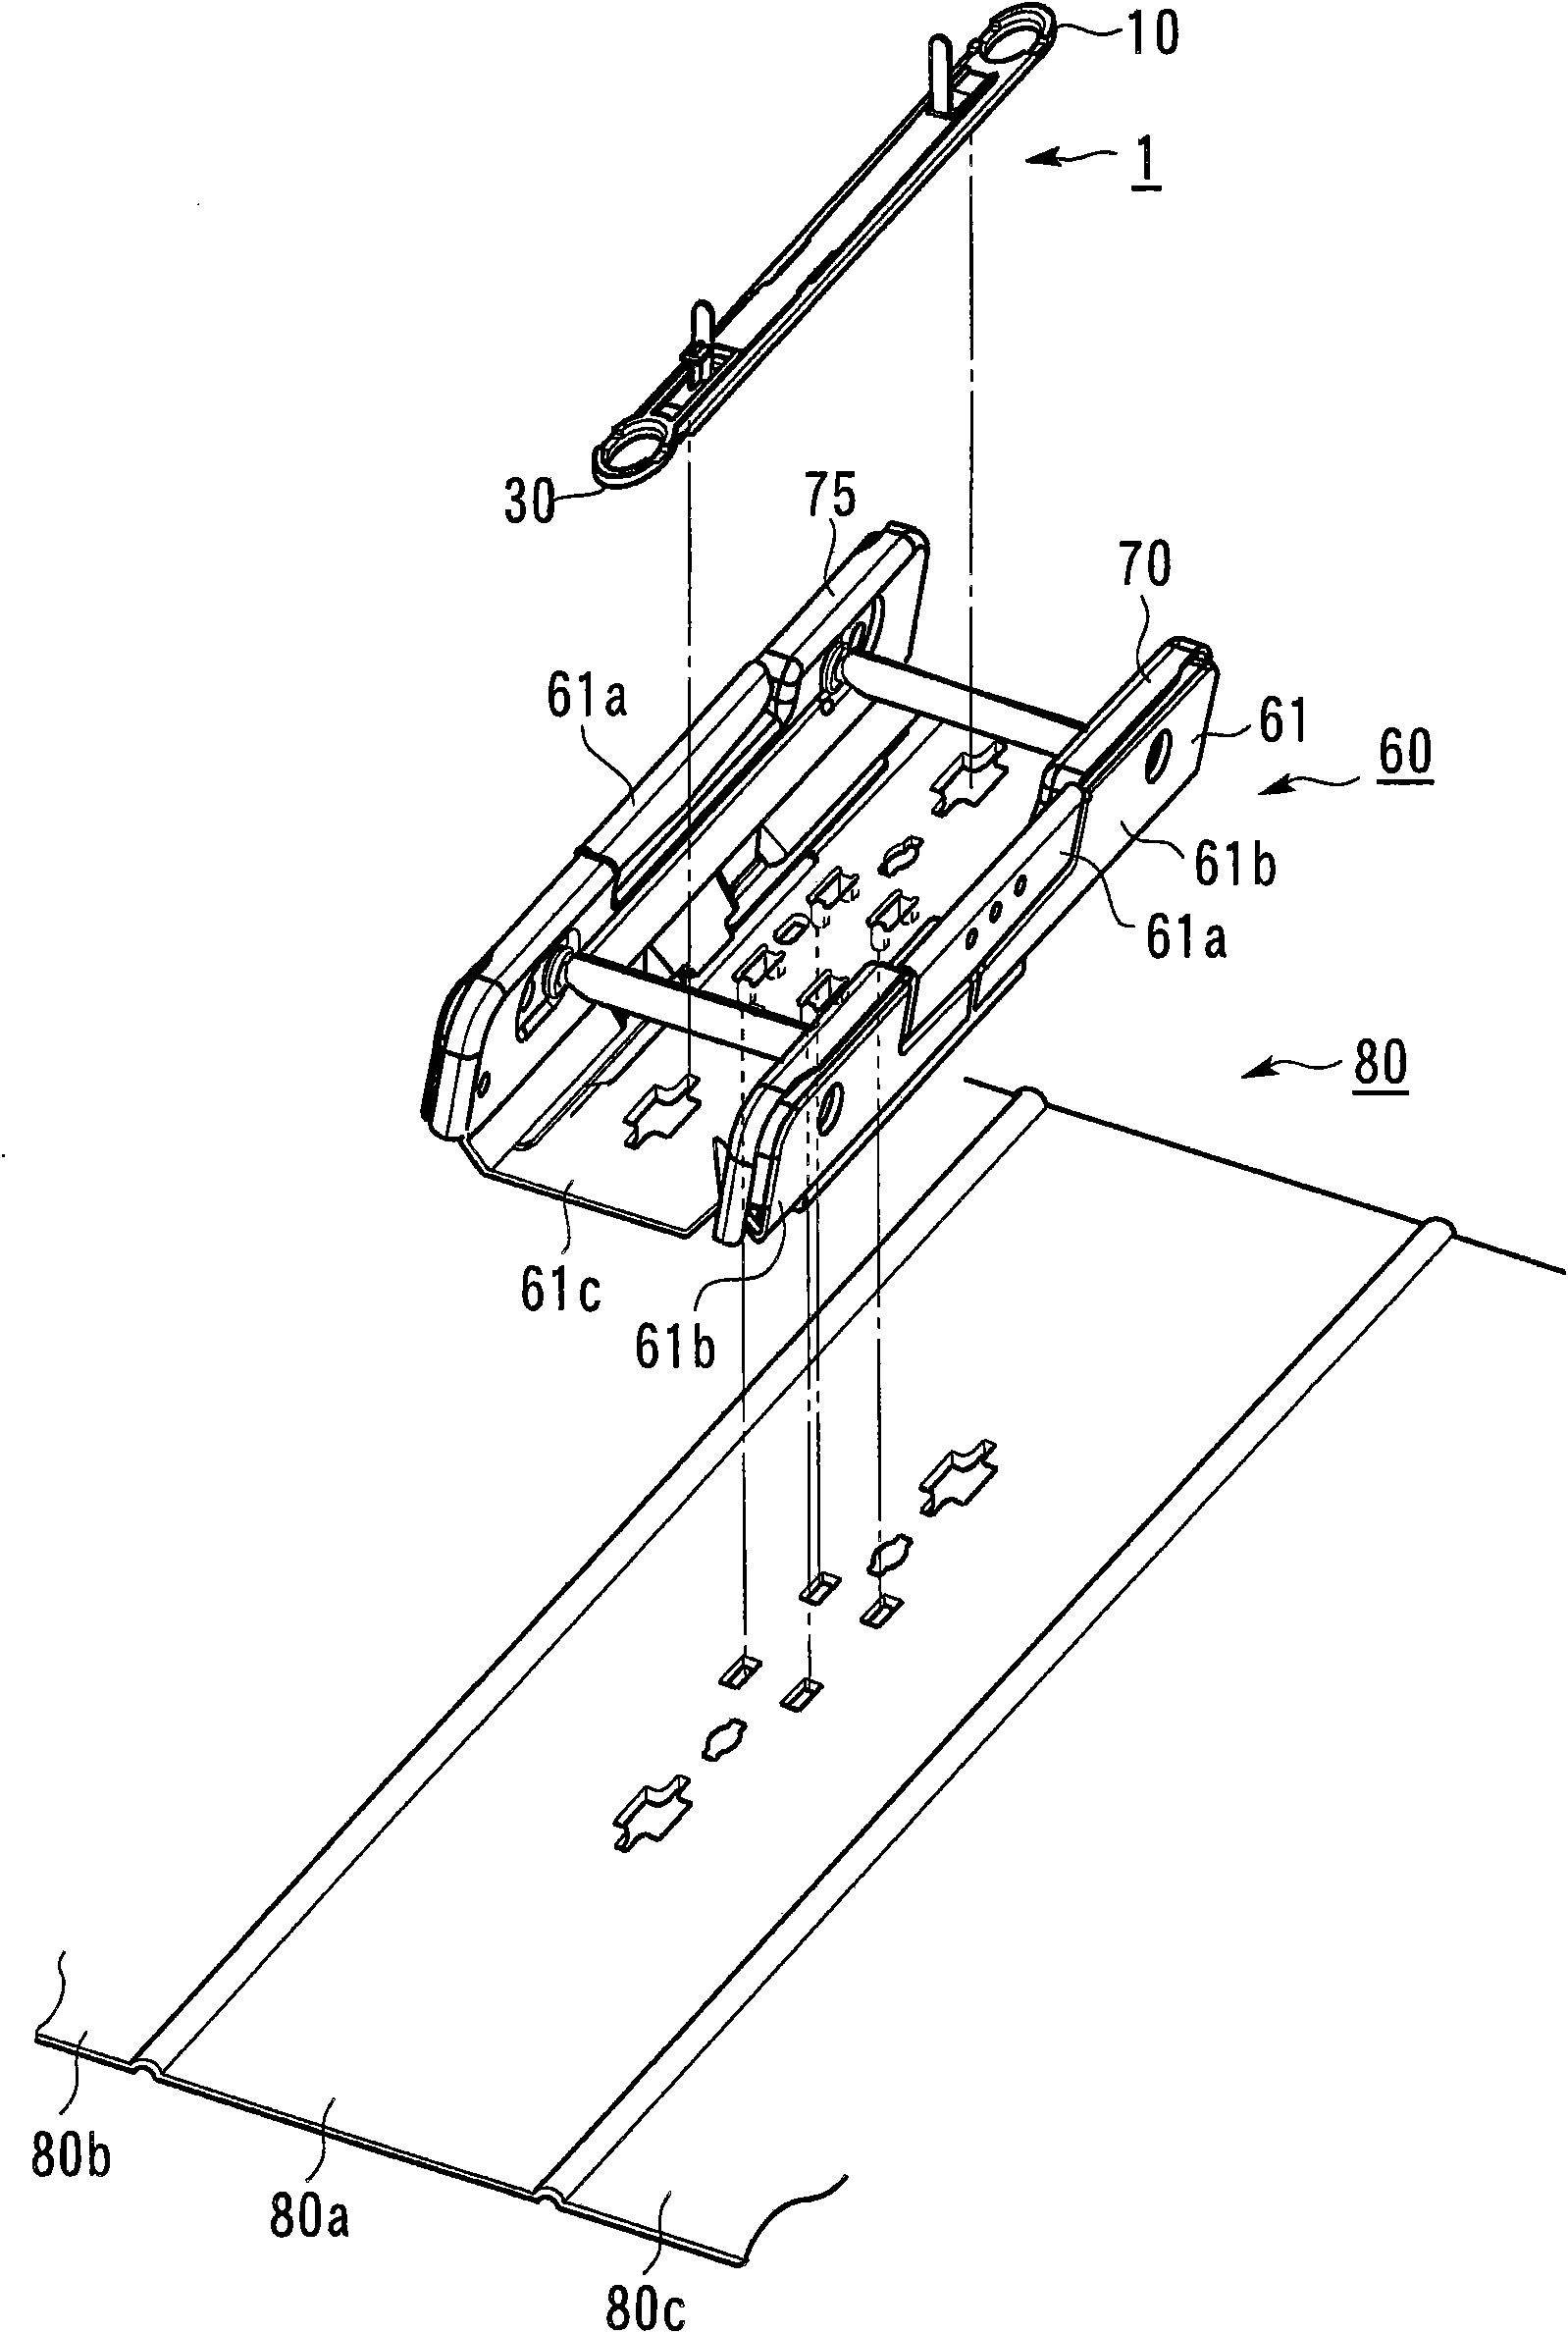 Loose leaf binding fixture attachment device, cover, and loose leaf binding fixture affixing method